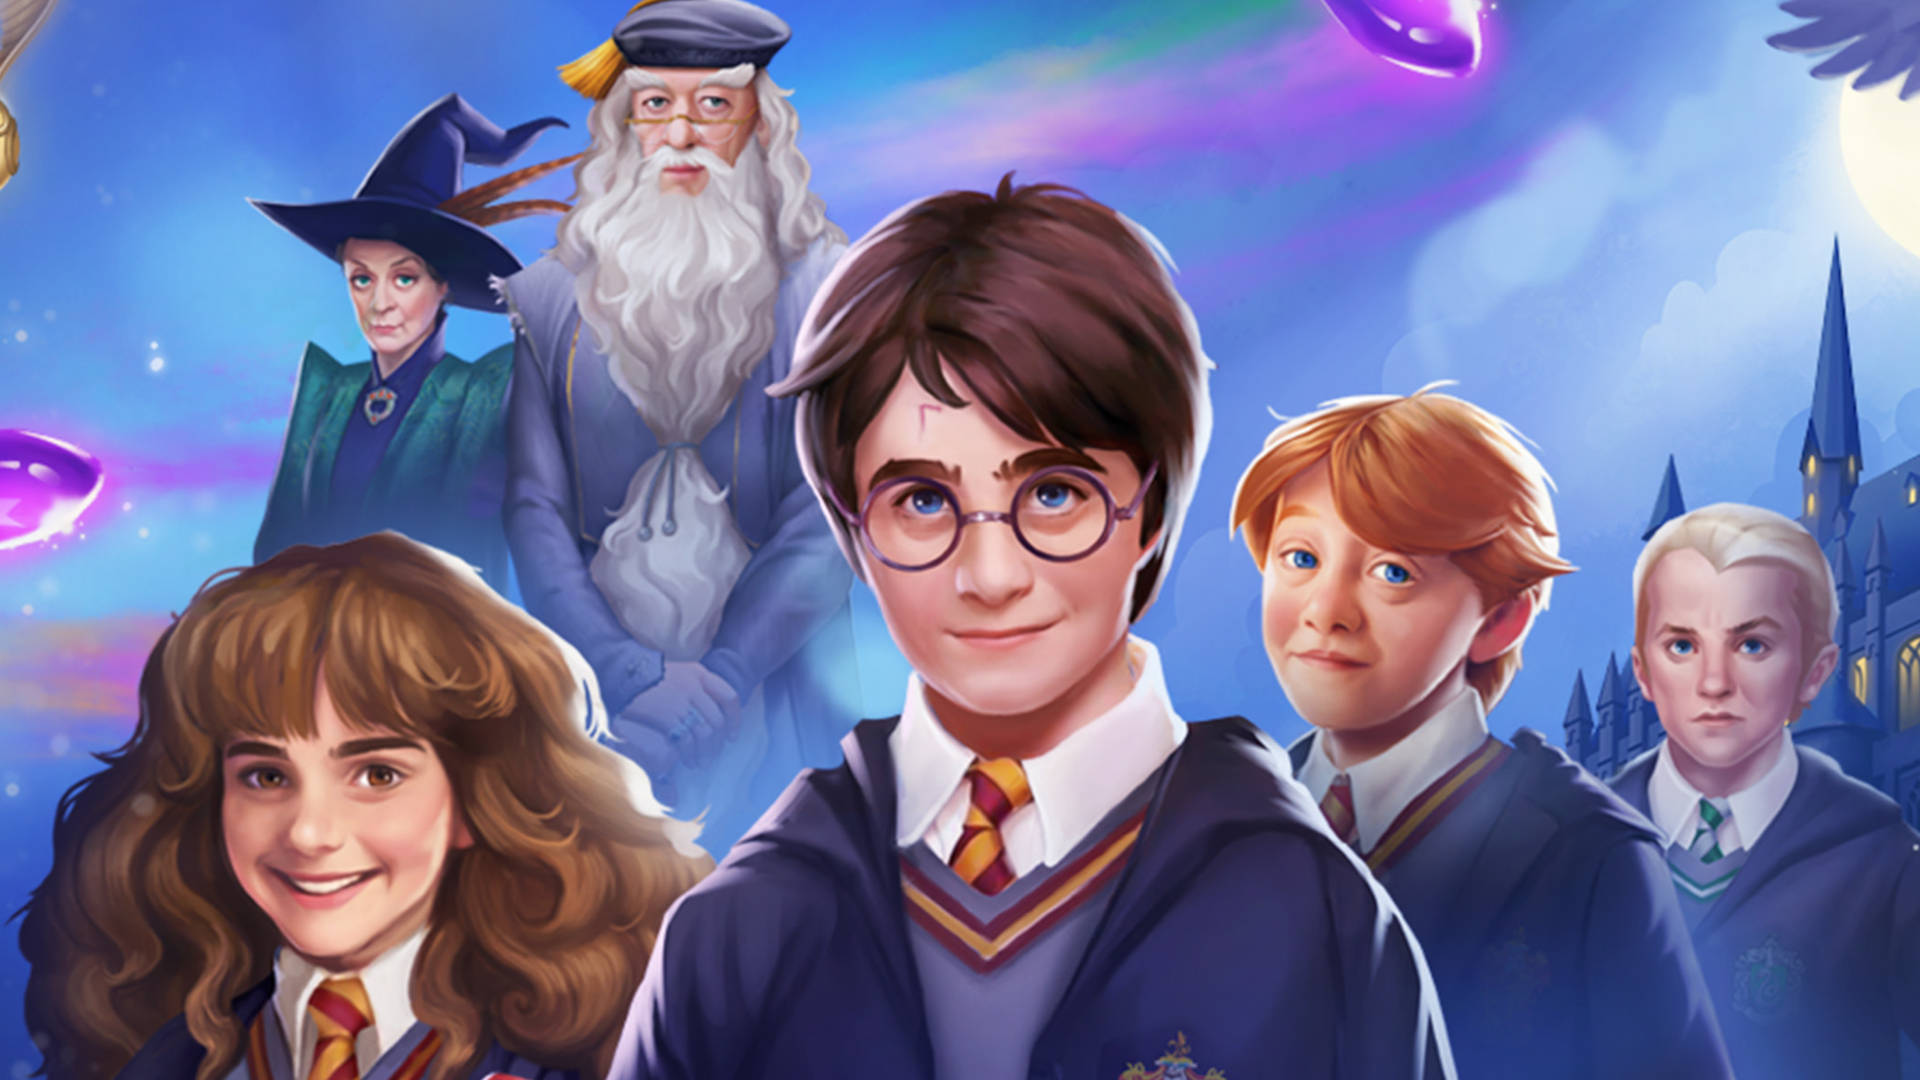 Harry Potter: Puzzles & Spells is a match-3 puzzler now open for pre-registration